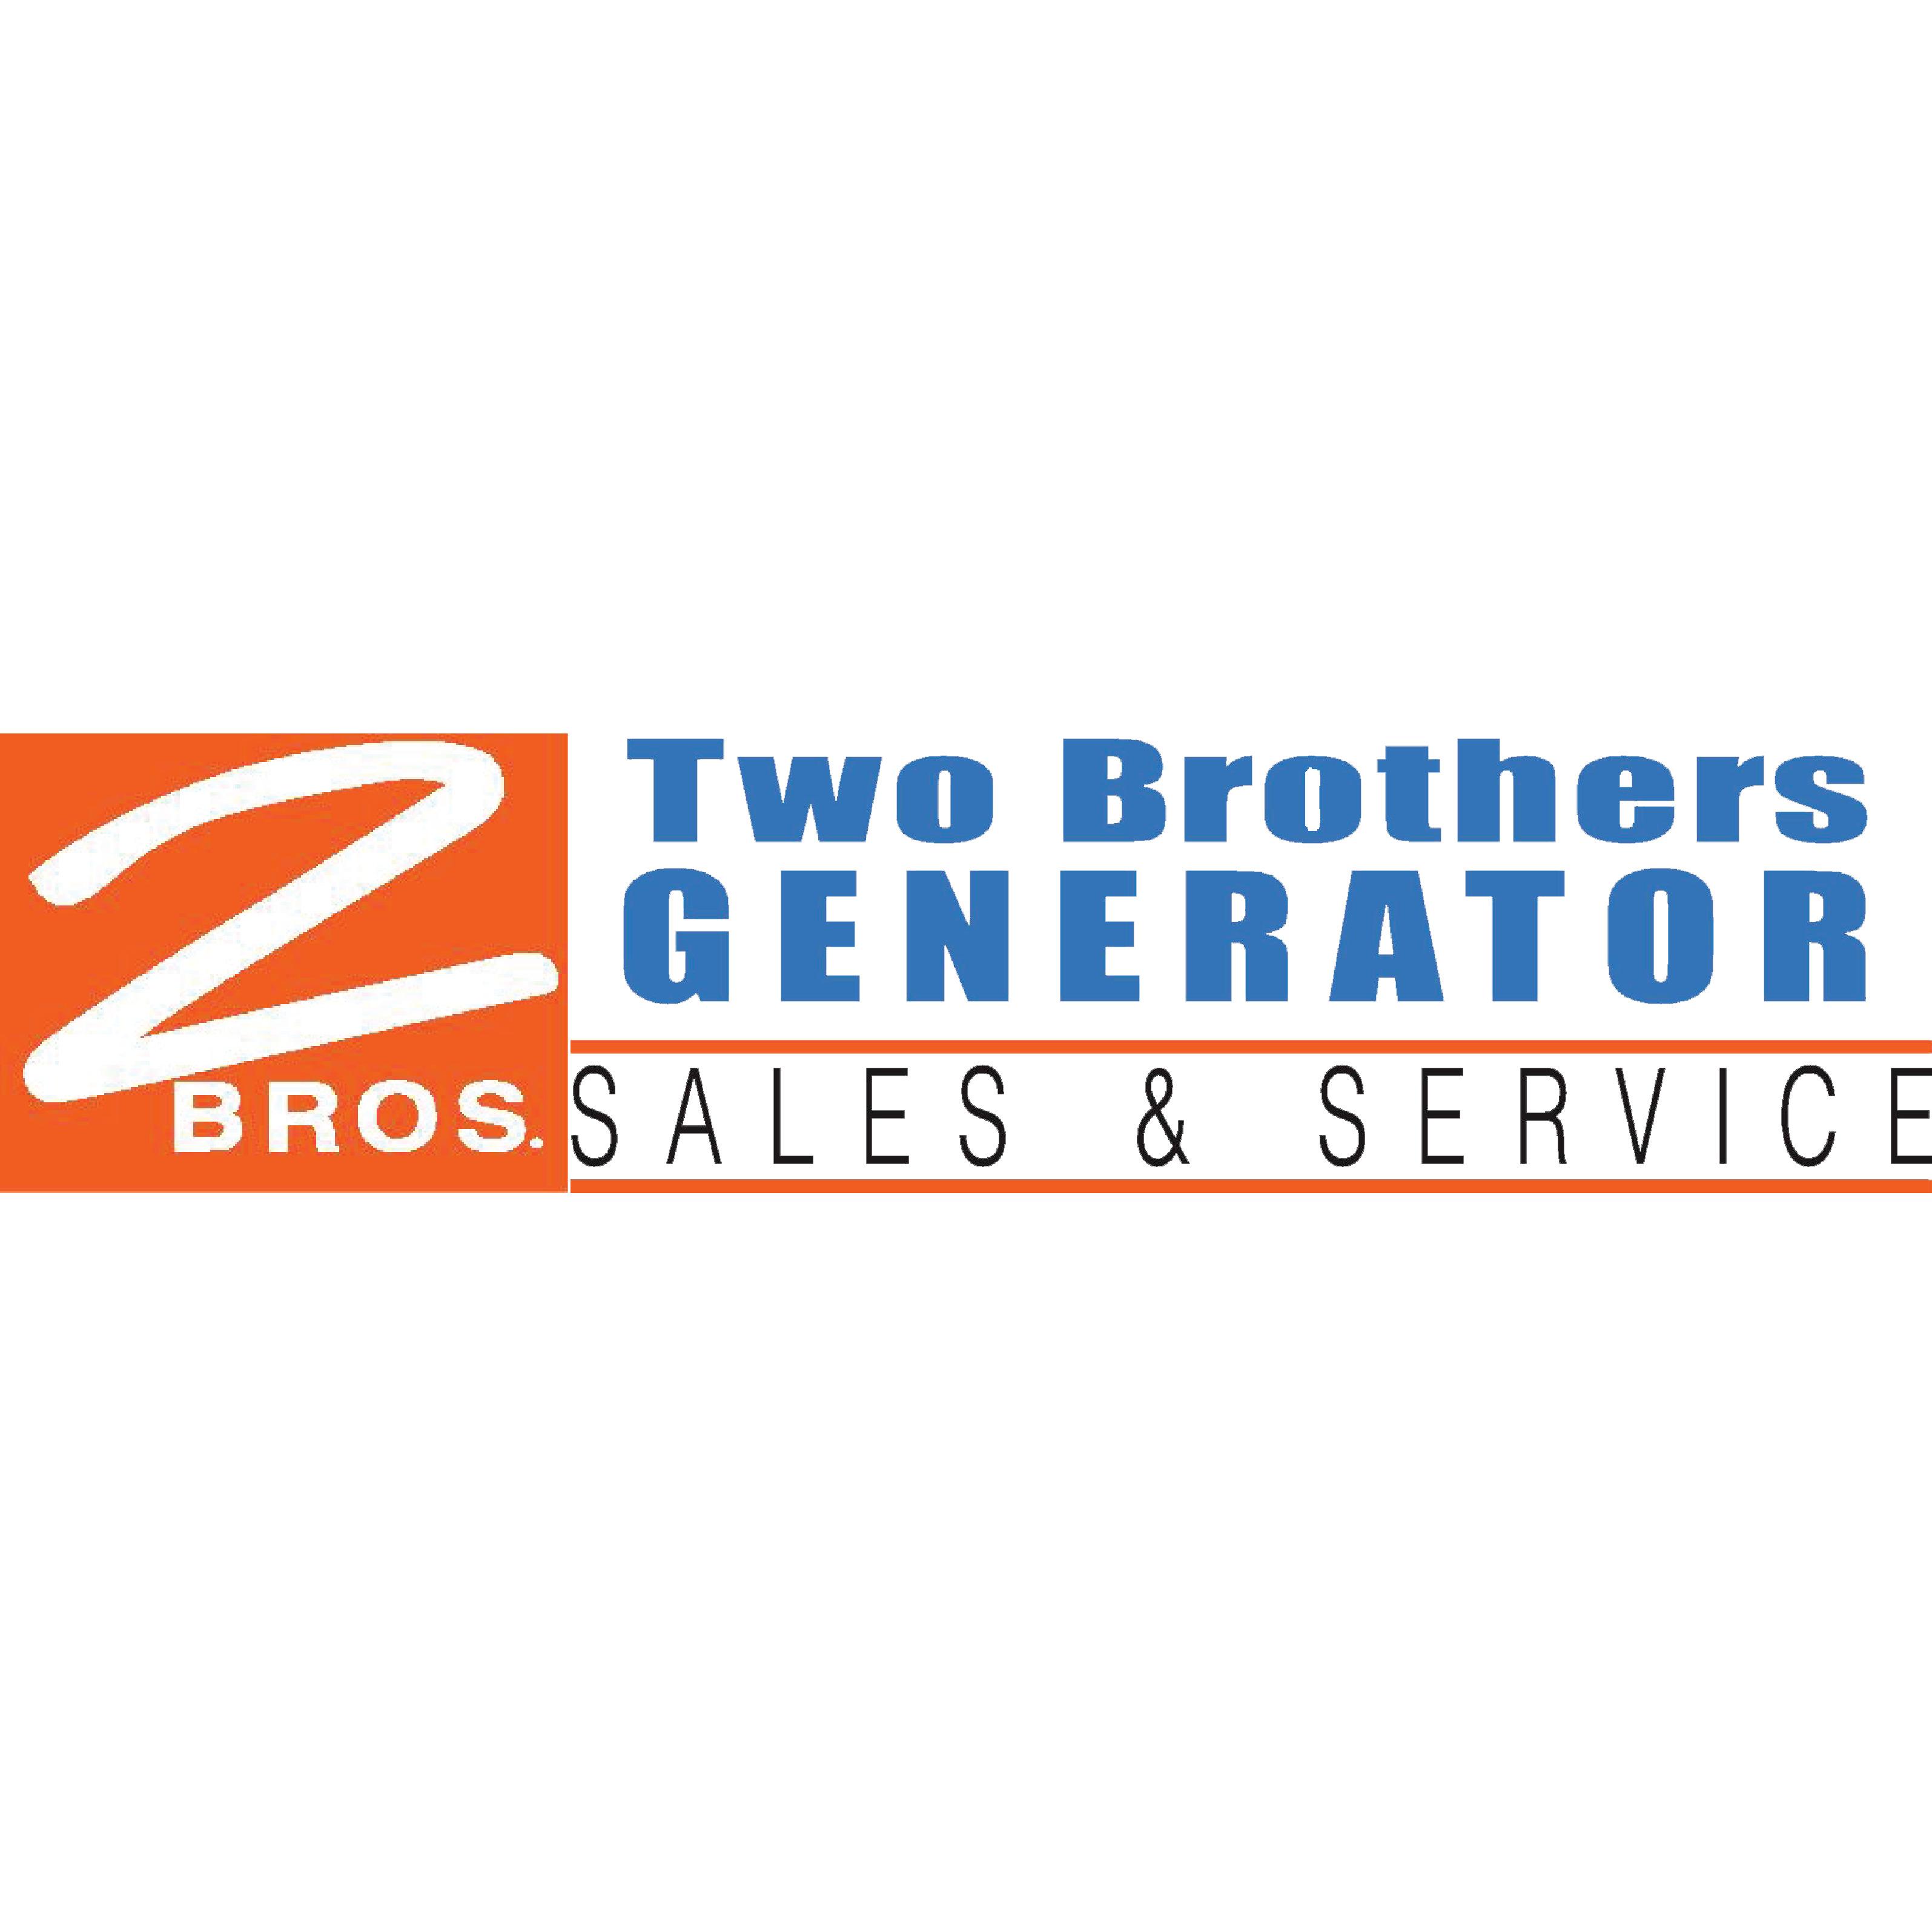 Two Brothers Generator Sales & Service Logo